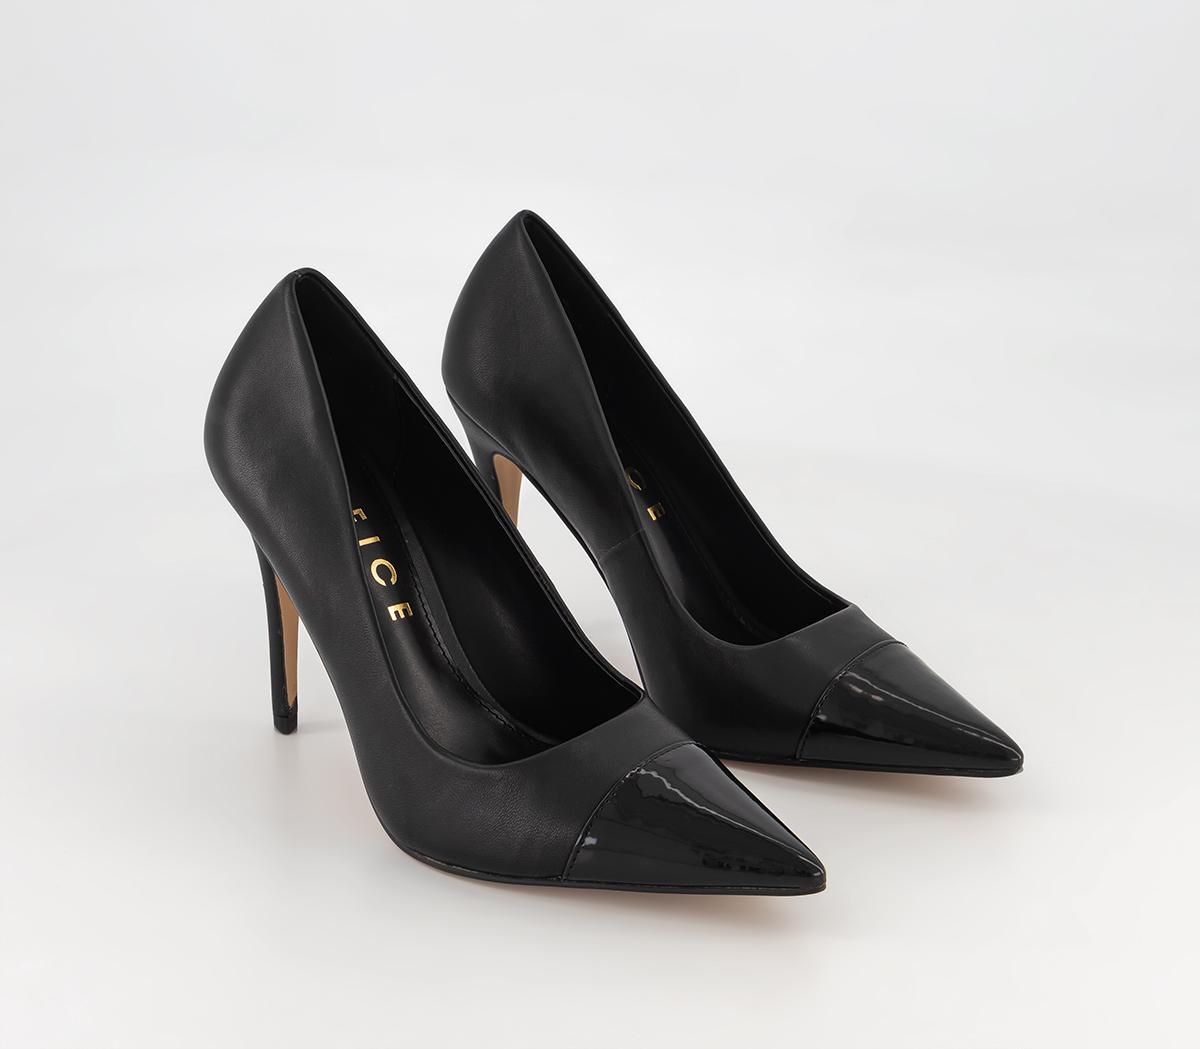 OFFICE Harmony Toe Cap Courts Black Leather - High Heels